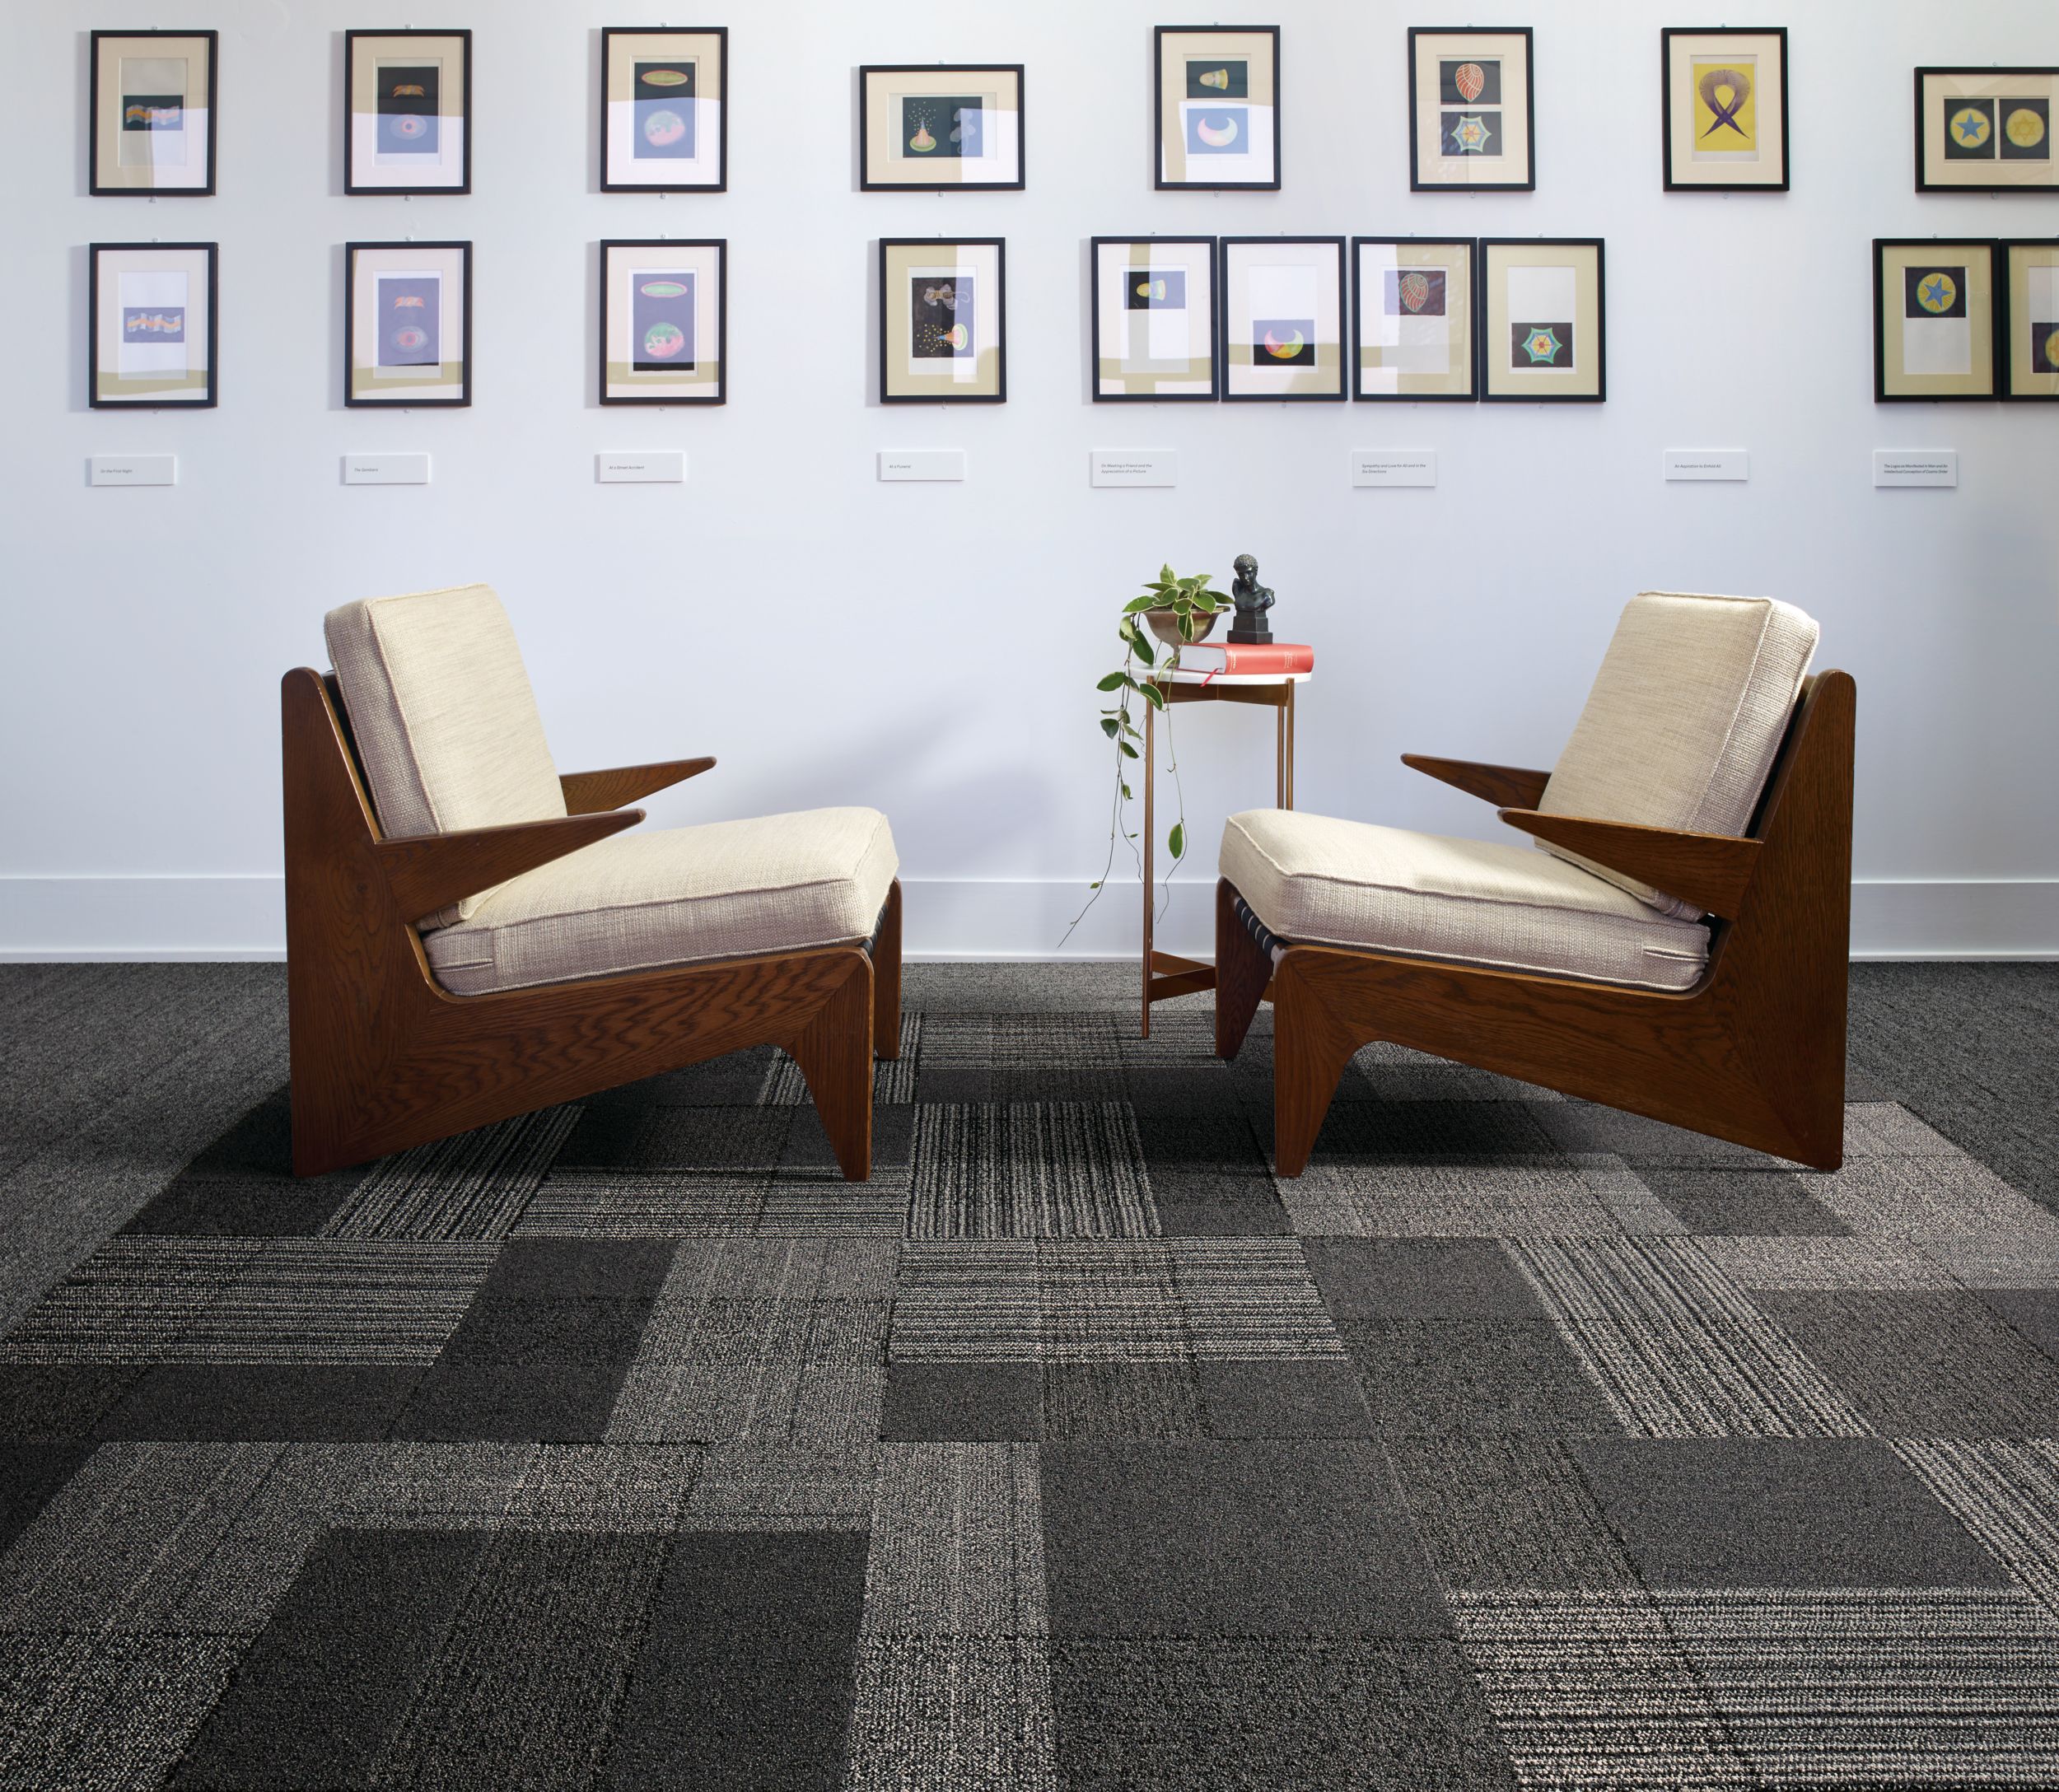 Interface ShadowBox Velour carpet tile and WW860 plank carpet tile in seating area with two chairs and a lot of small prints on the wall numéro d’image 6